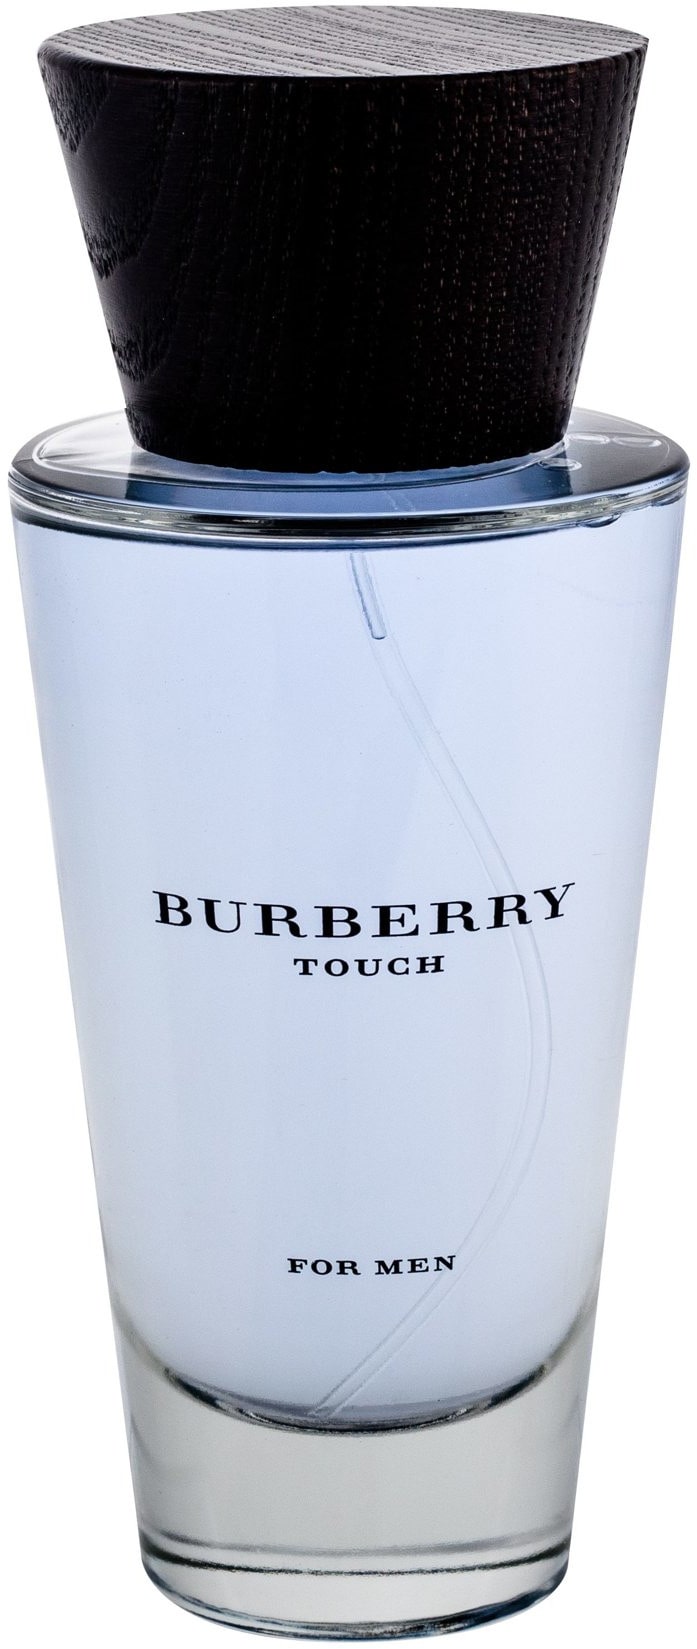 Burberry Touch EDT Spray Perfume for Men by Burberry